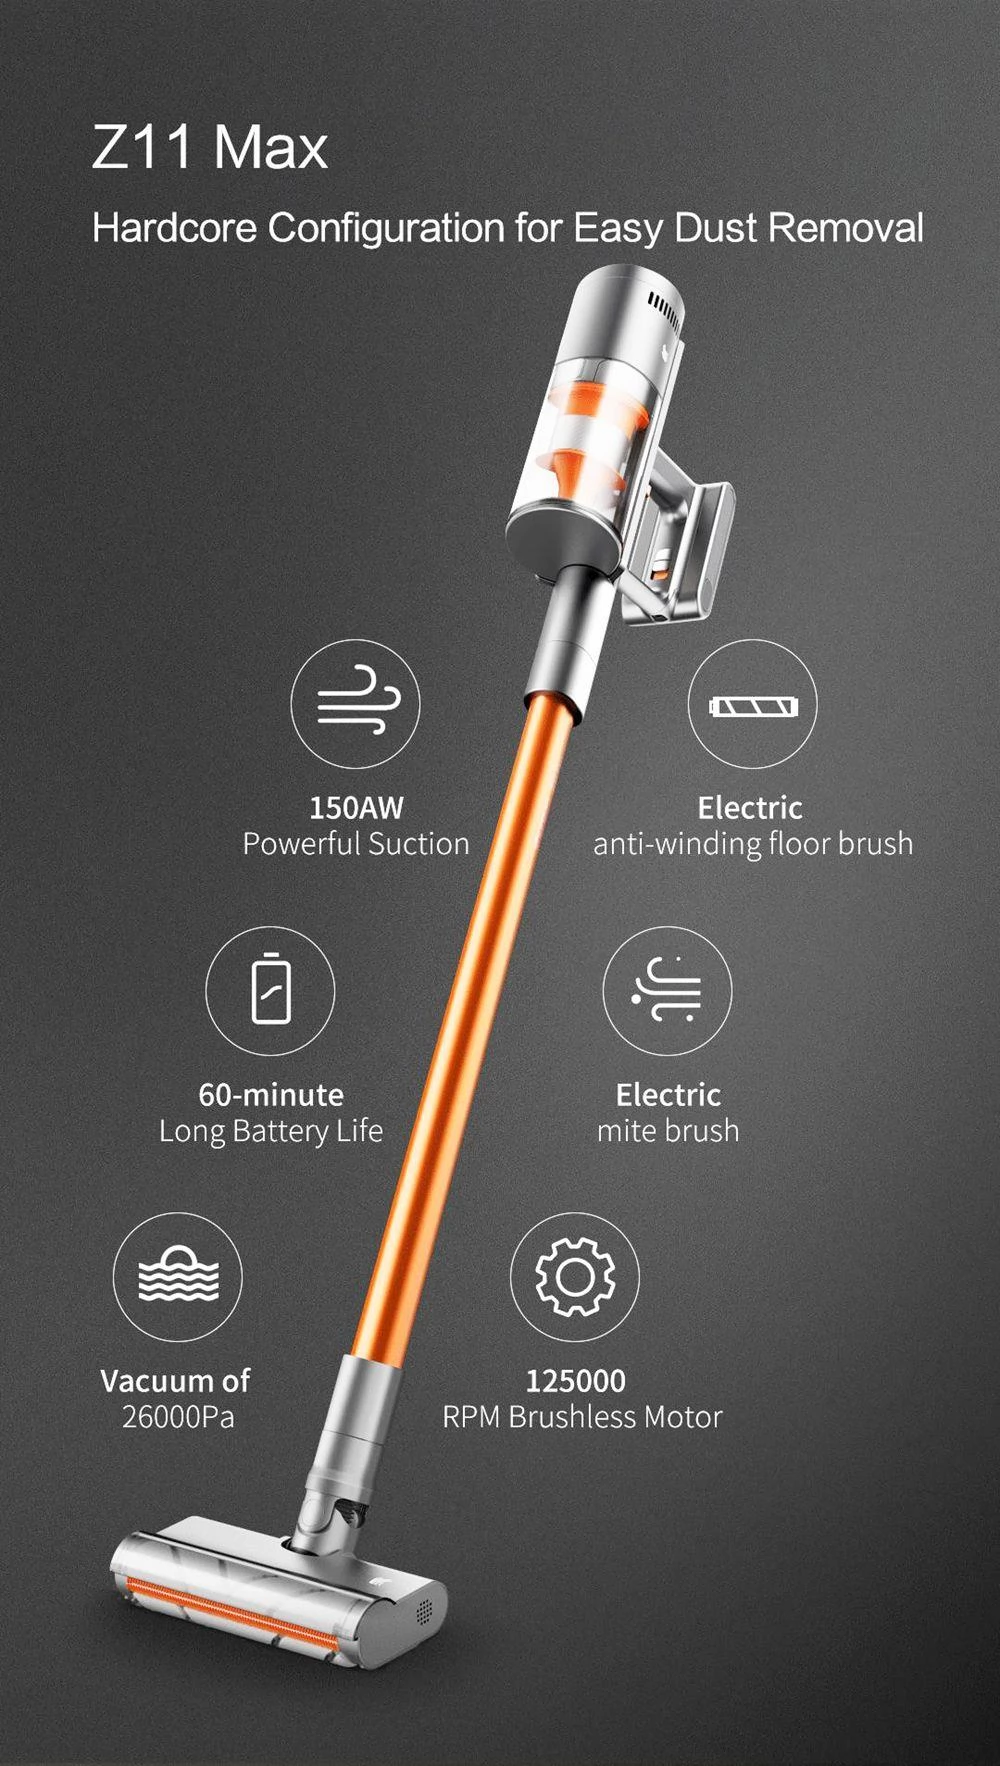 Shunzao Z11 MAX Suction Power 150AW 26000Pa Hand-held Cordlesss Vacuum Cleaner 2500mAh Lithium Battery (EU Version)